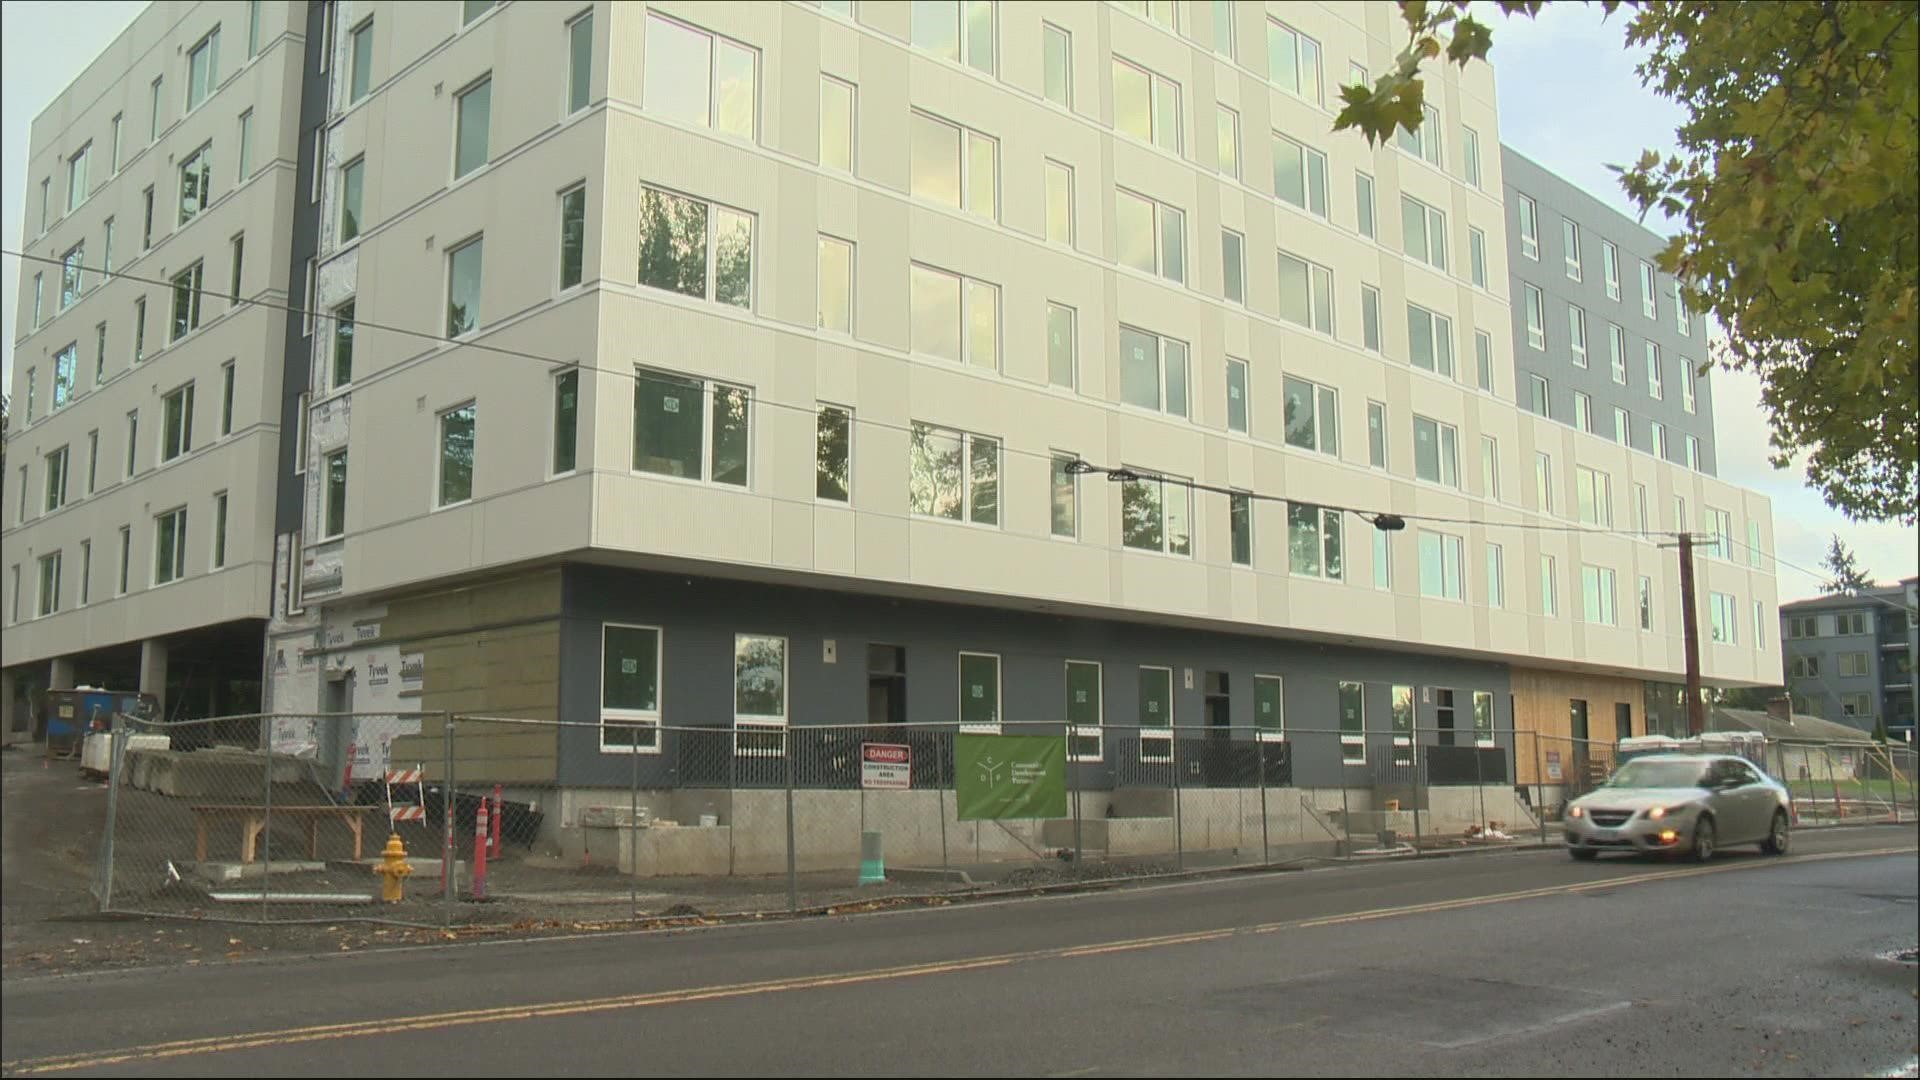 Seven affordable housing complexes are currently under construction across Multnomah, Clackamas and Washington counties. People are already moving in.